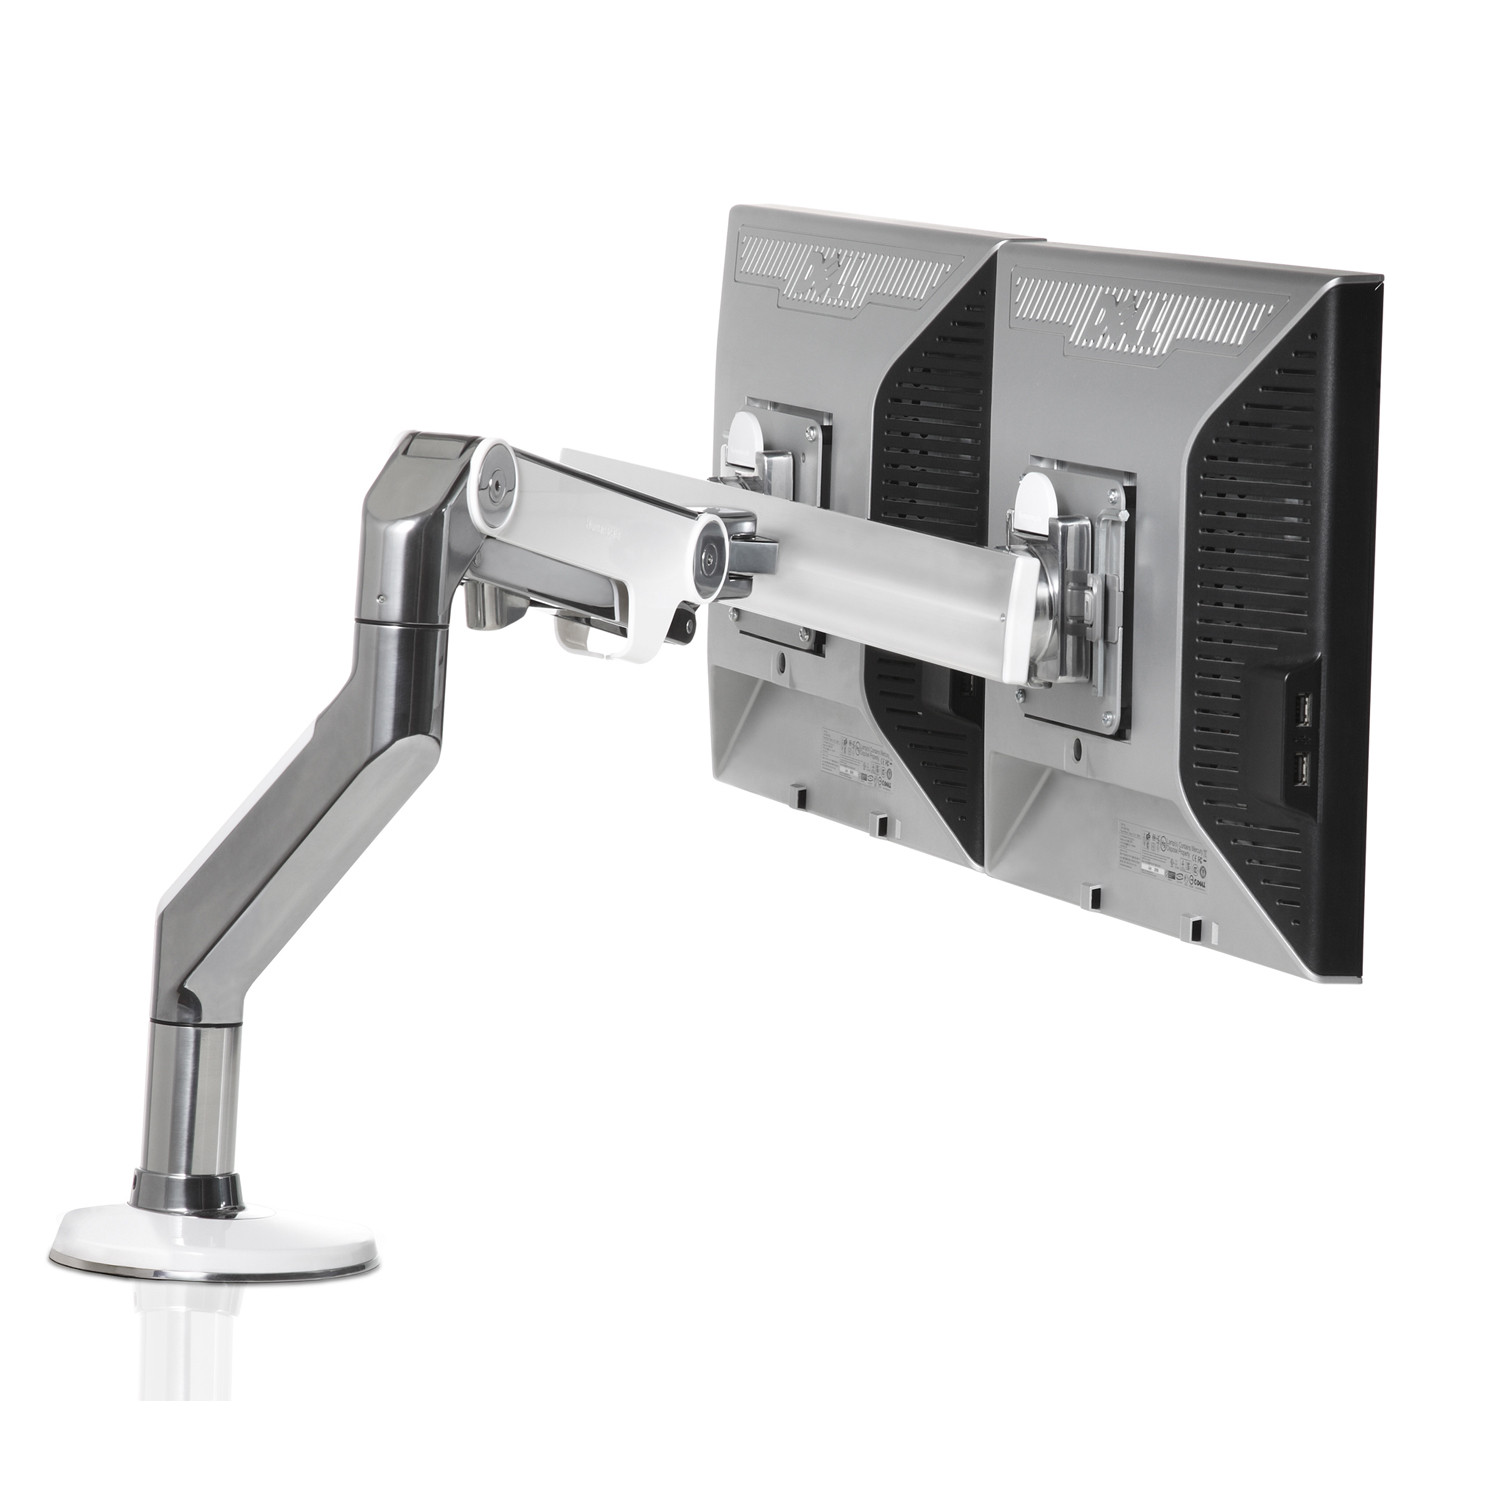 M8 Monitor Arm by Humanscale